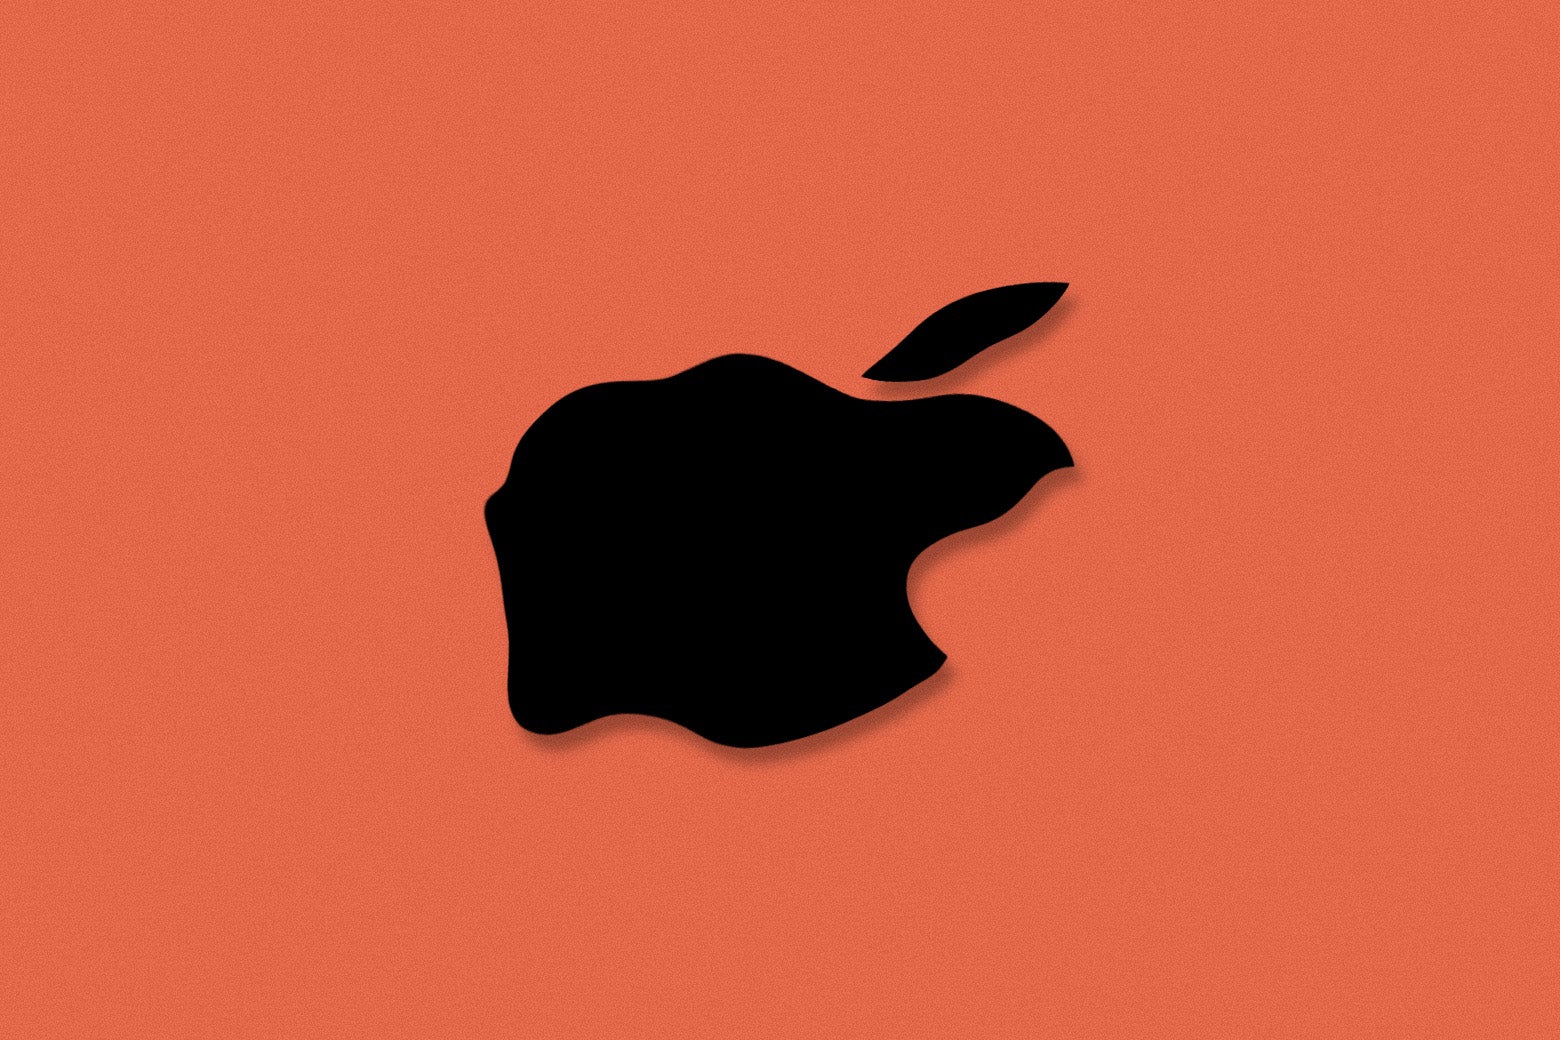 The Apple logo, looking rotted and lying flat on a red floor